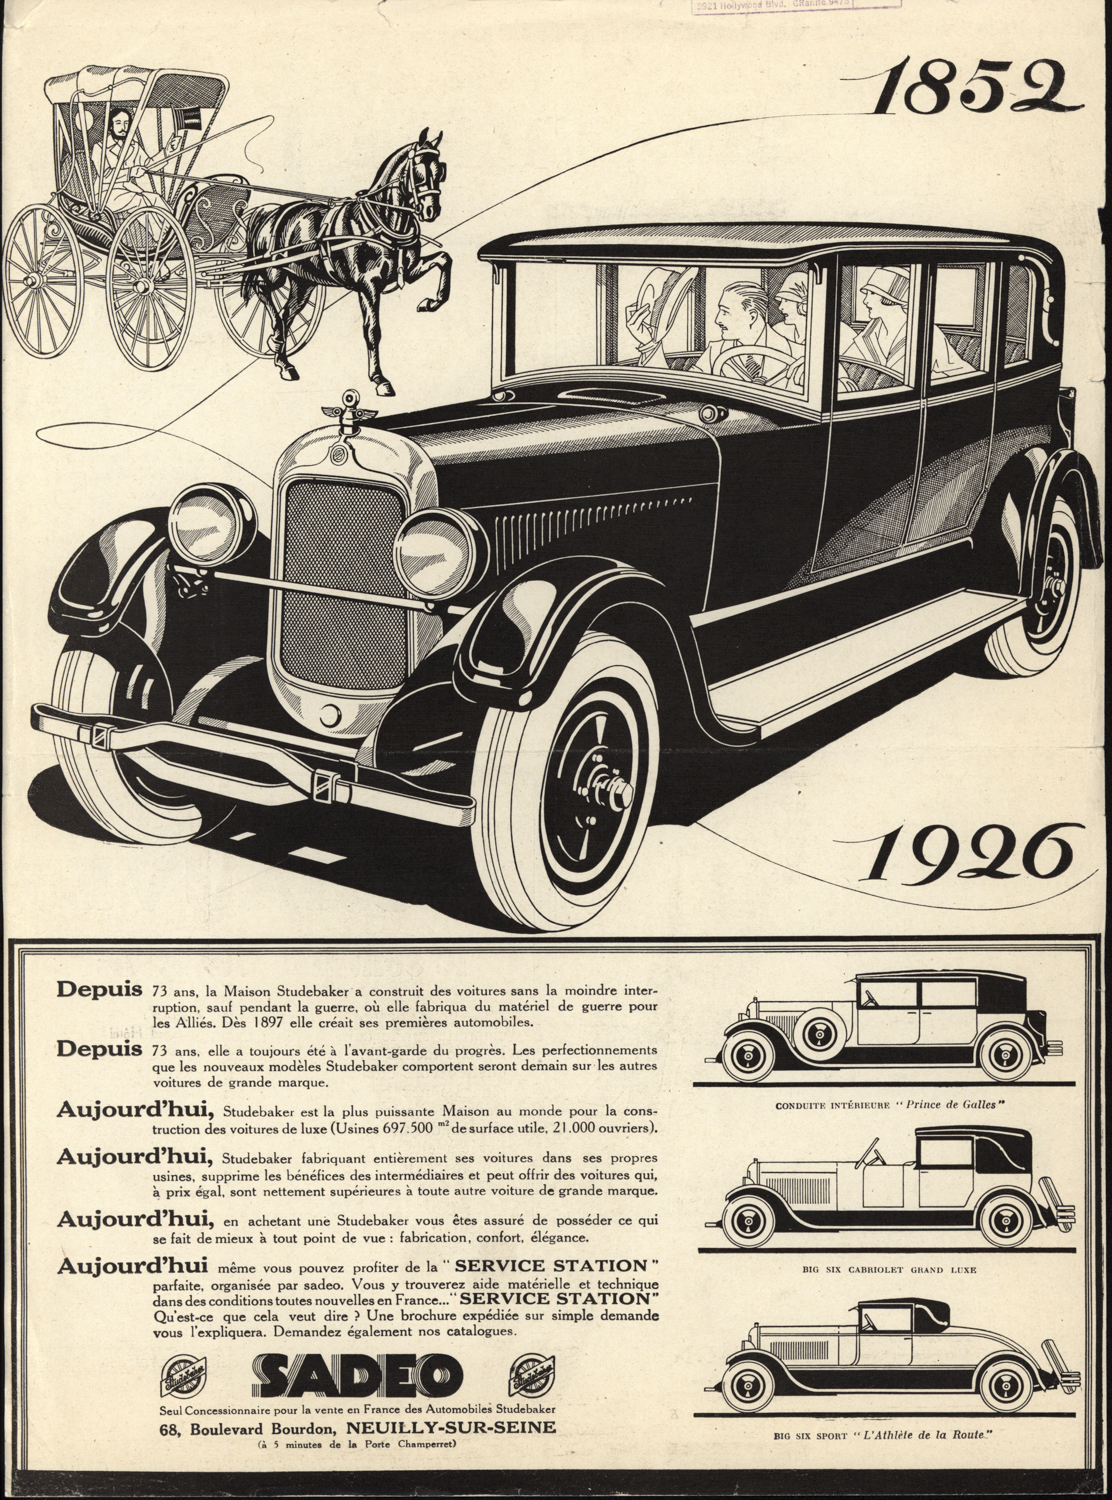 By the mid-1920s, Studebaker's products were taking on a very pleasing appearance. 